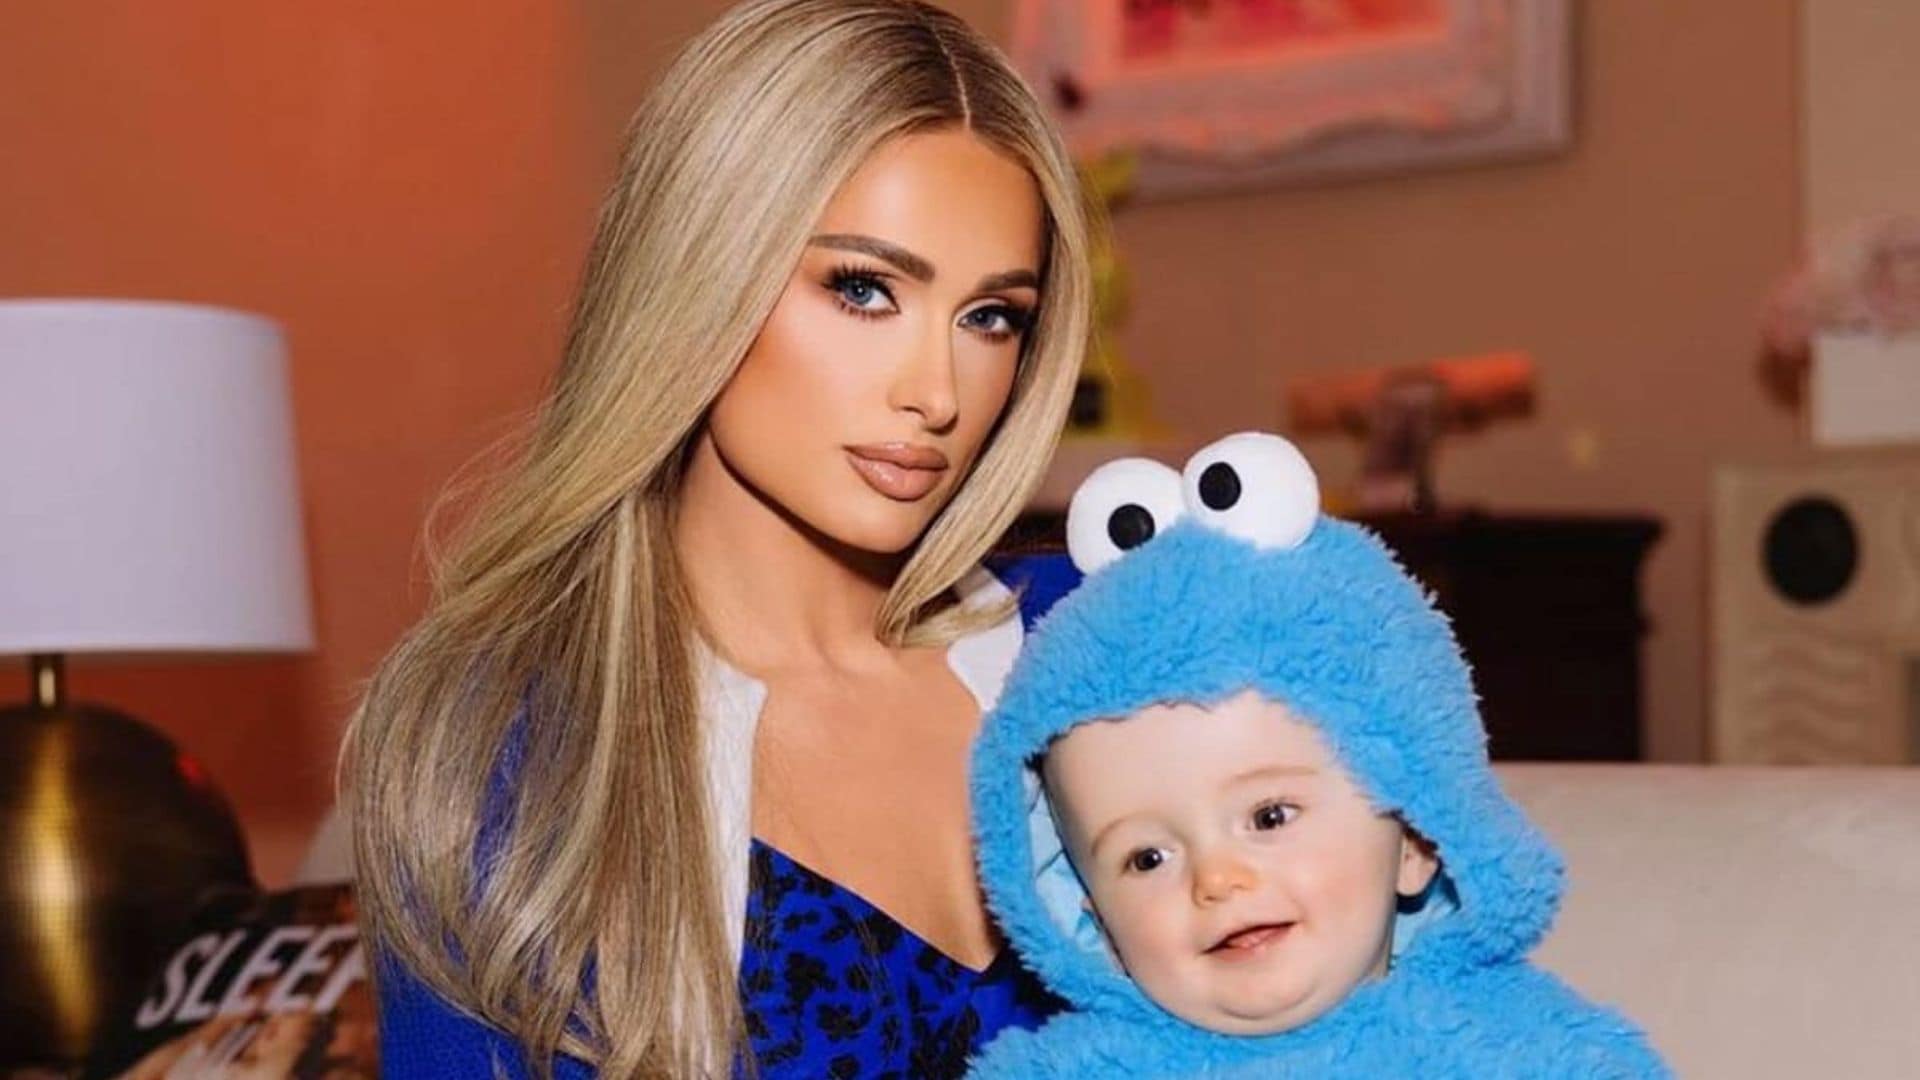 Paris Hilton was ‘hurt’ and ‘heartbroken’ after ‘cruel’ comments about her baby’s appearance